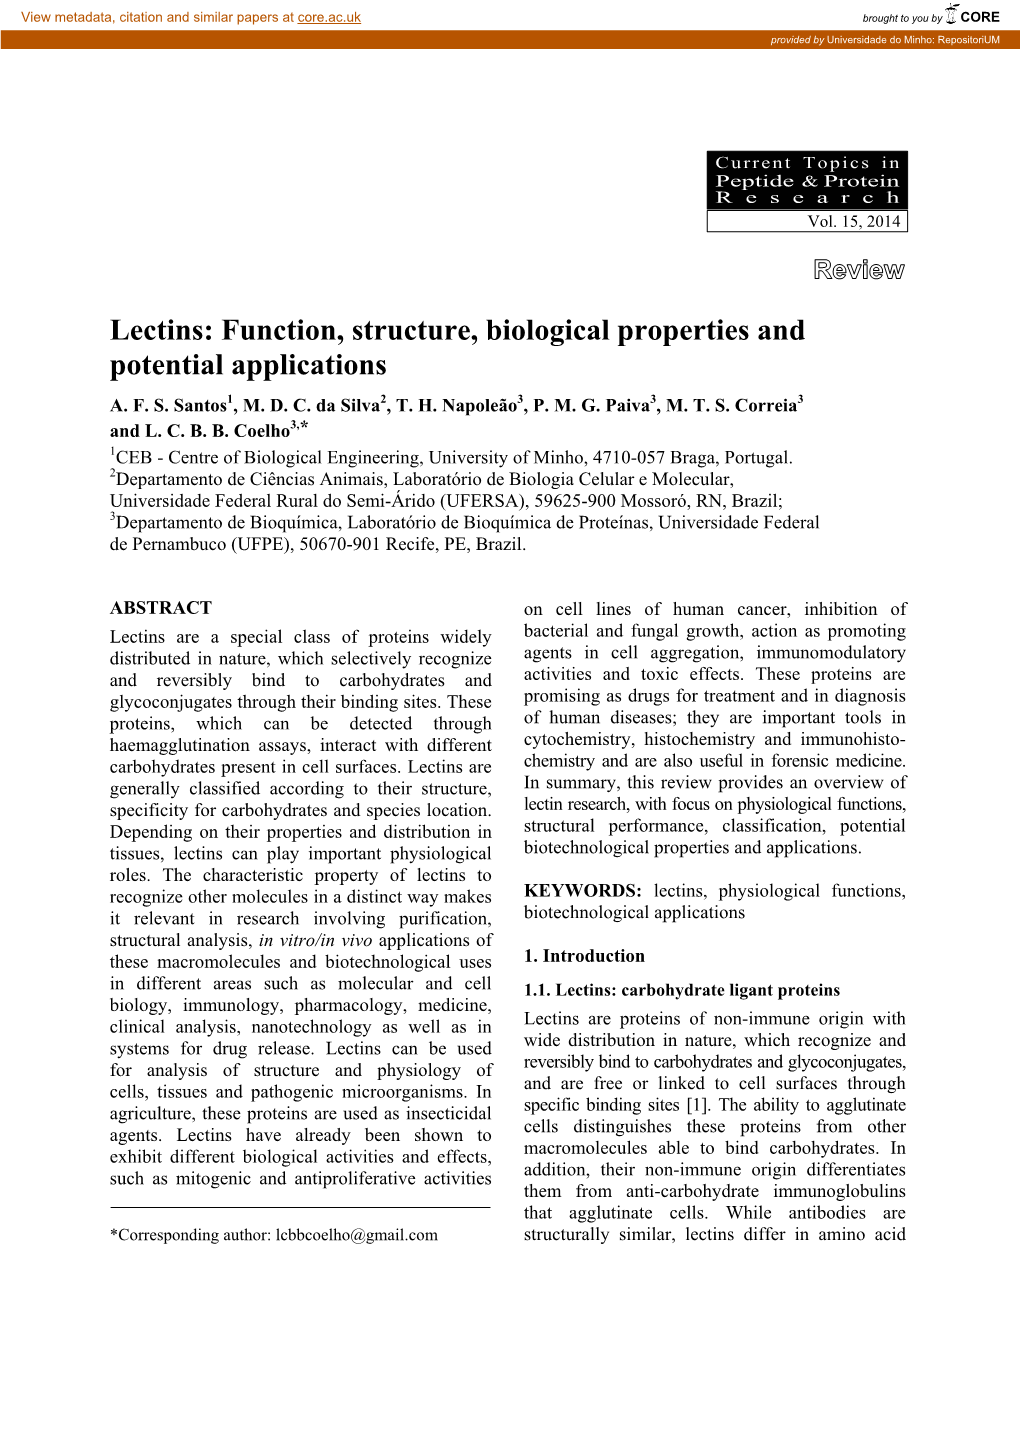 Lectins: Function, Structure, Biological Properties and Potential Applications